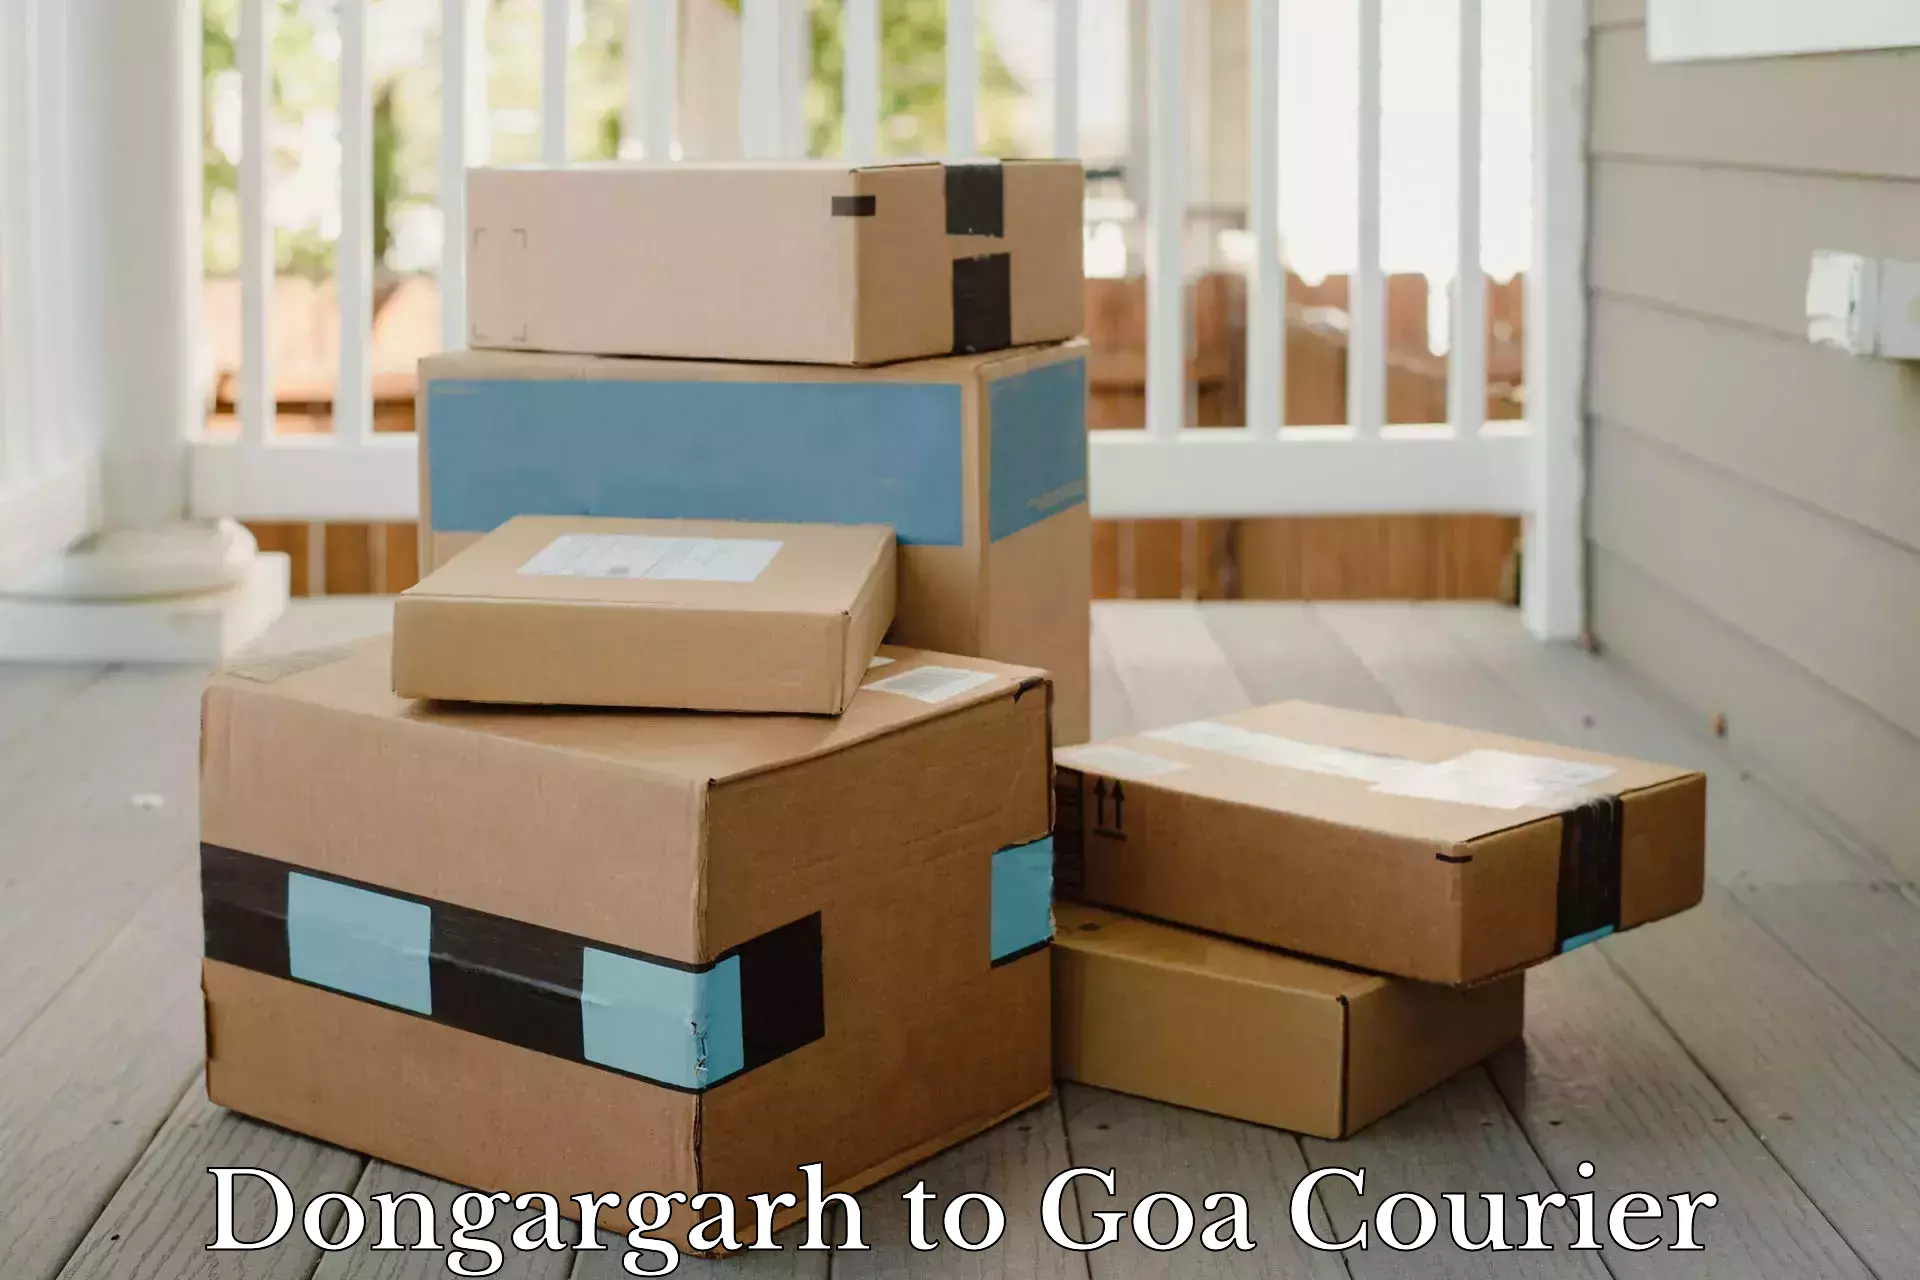 Express delivery capabilities Dongargarh to Goa